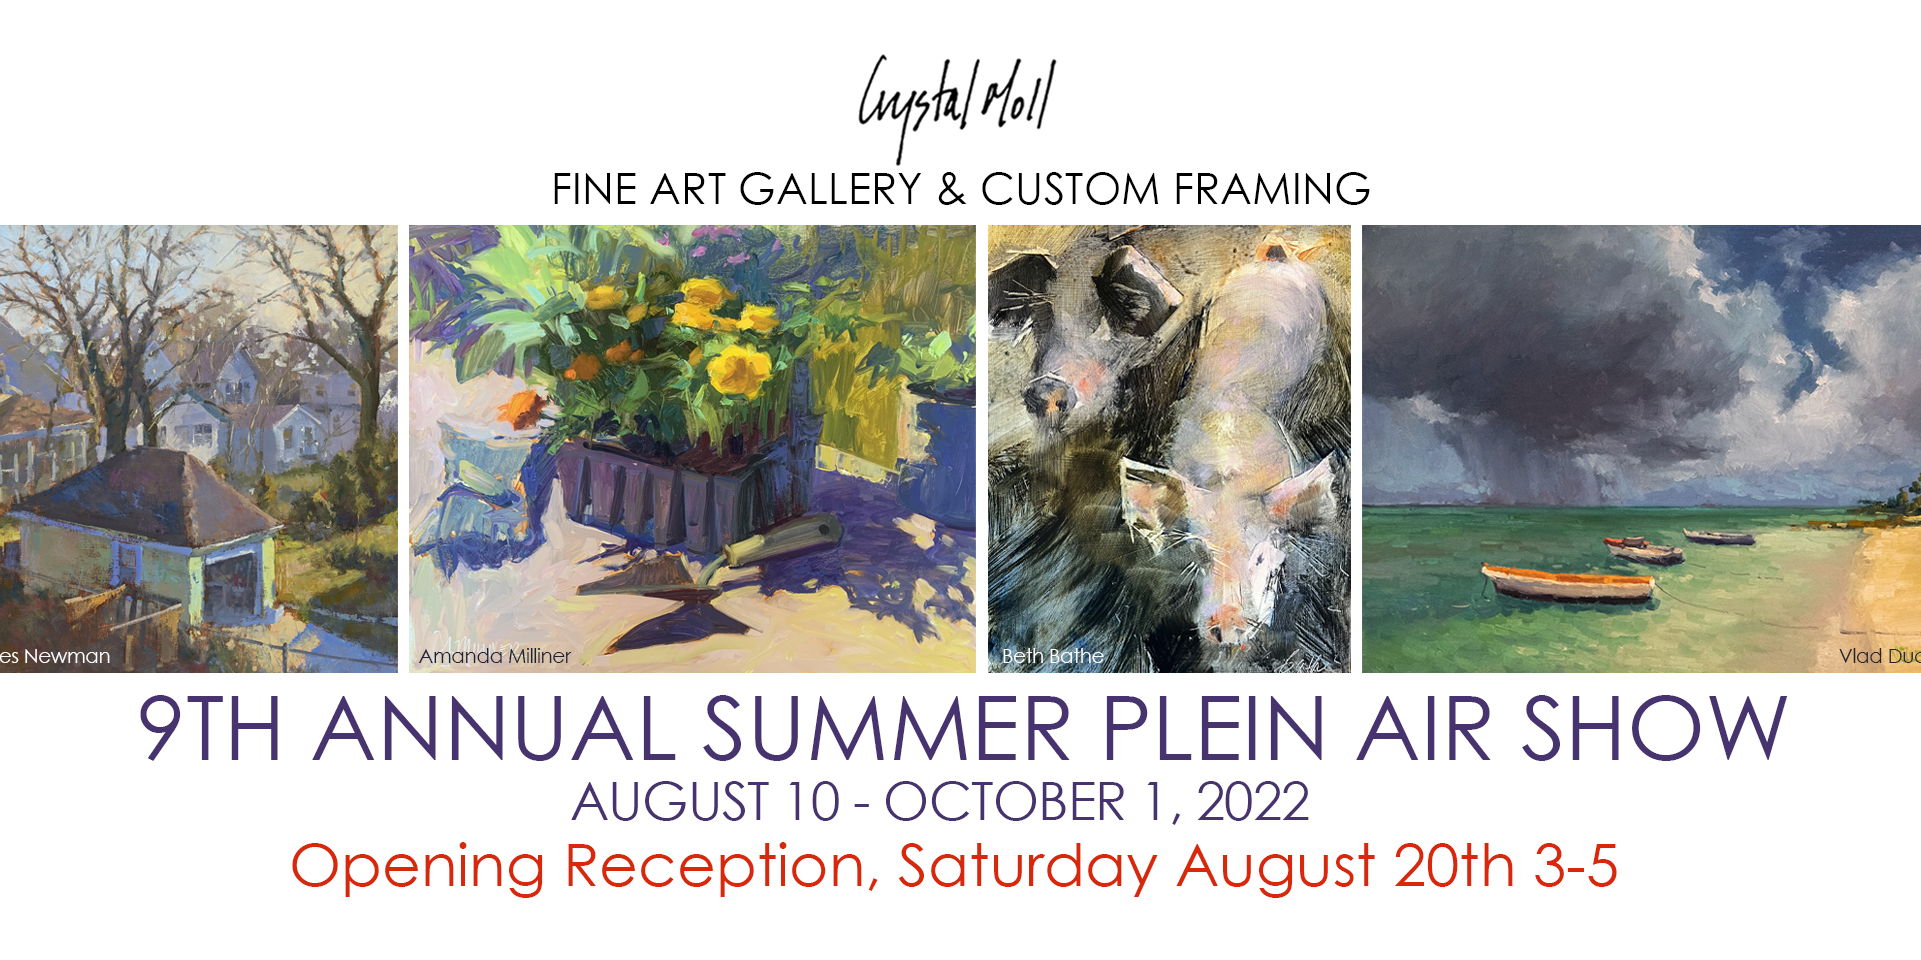 Opening Reception/Wet Paint Sale/Demo: 9th Annual Summer Plein Air Show promotional image